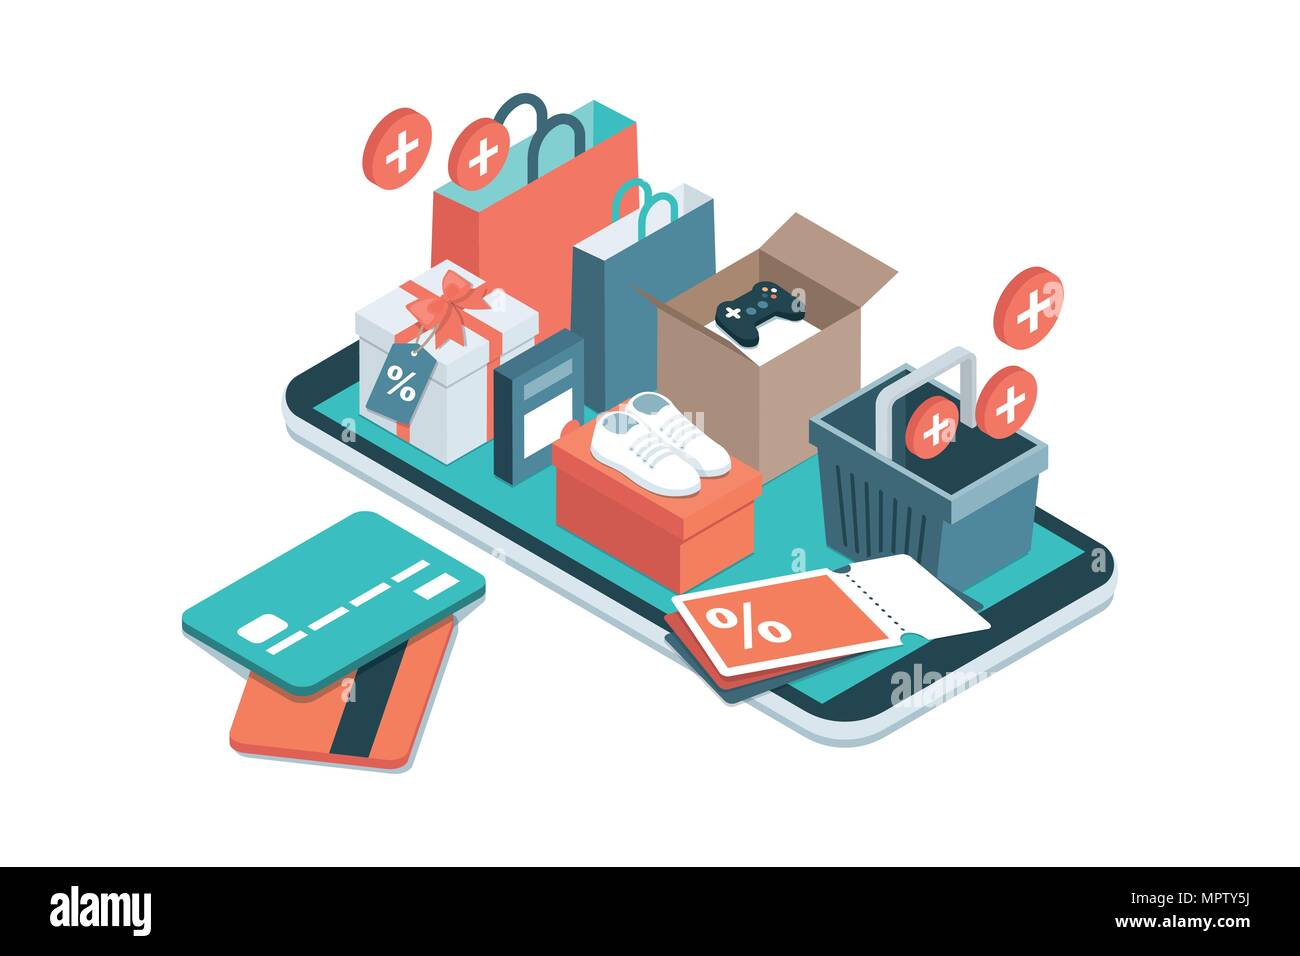 Online shopping app: gifts, shopping items, credit cards and discount coupons on a smartphone Stock Vector